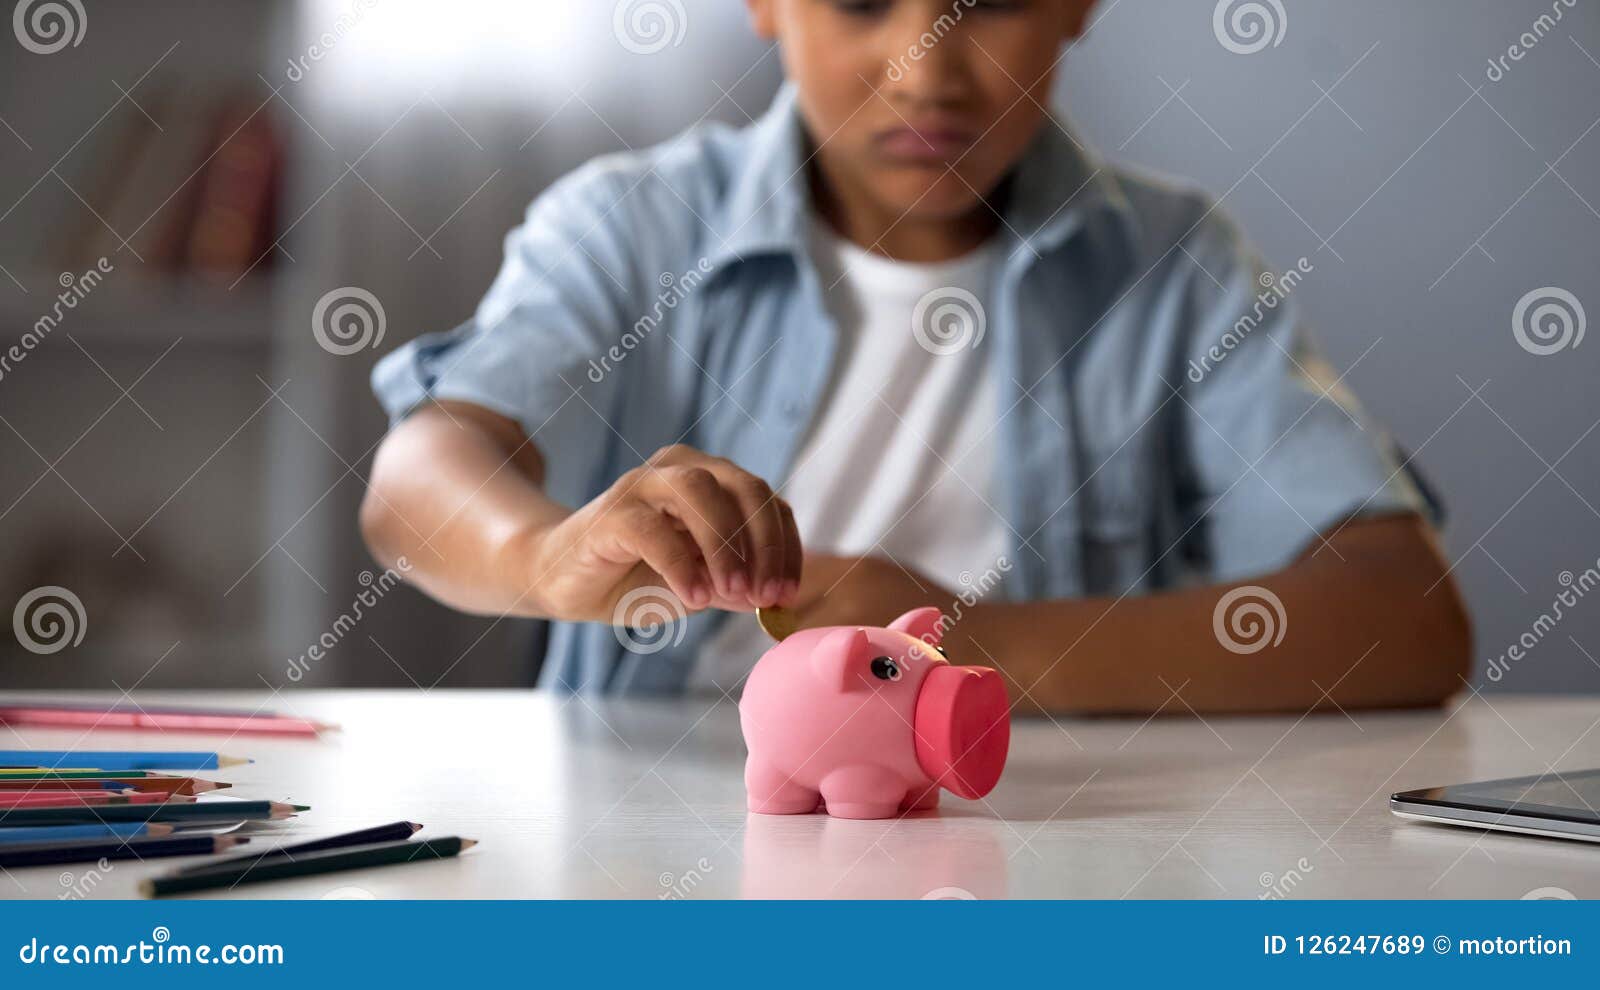 little boy putting pocket money in piggy bank, raising funds for desired toy